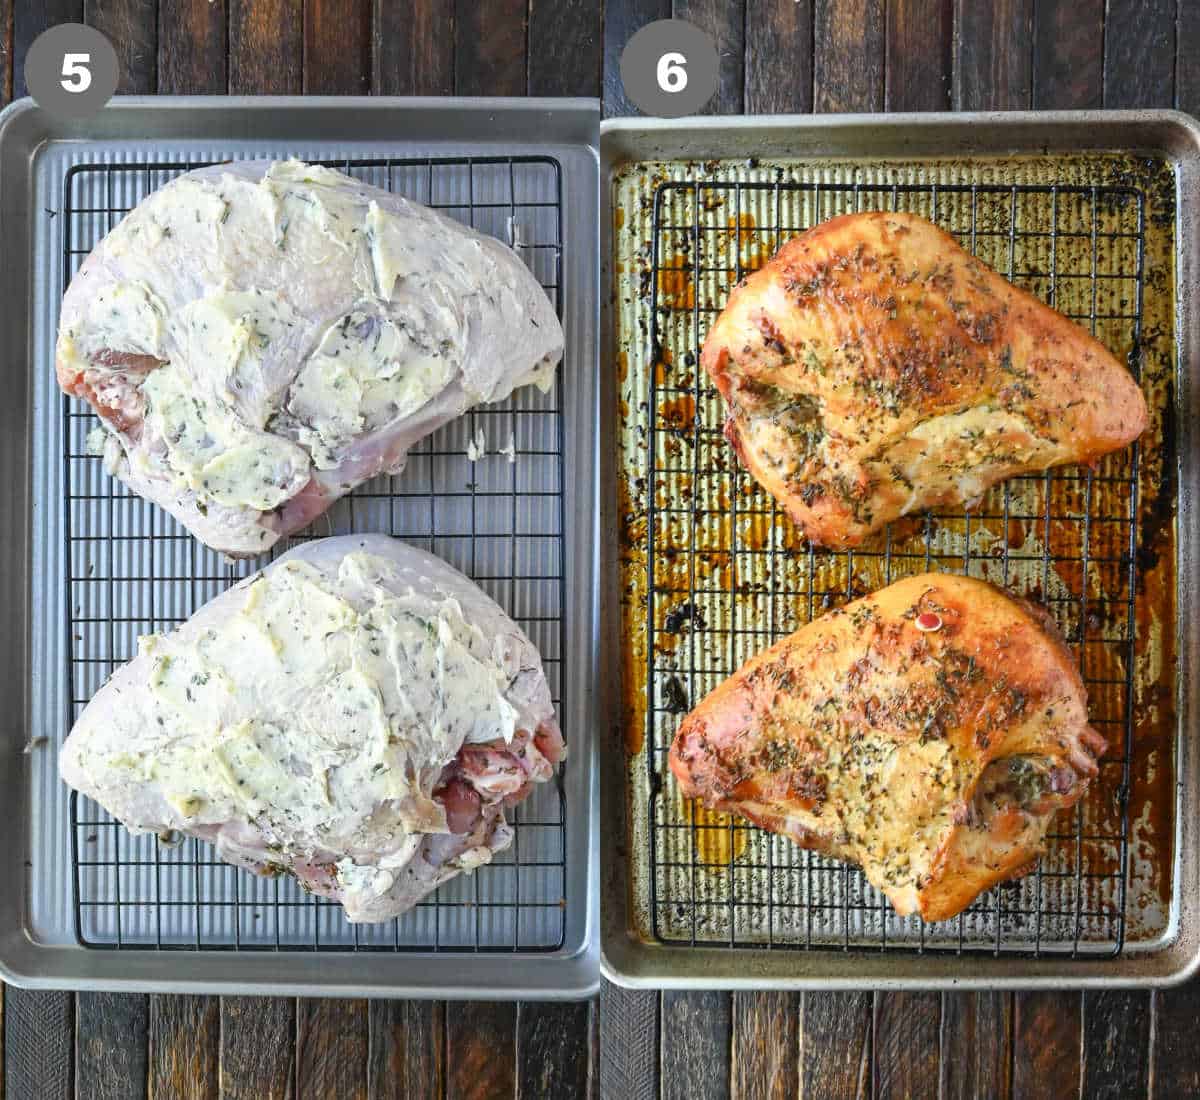 Turkey breast on a roasting pan with herb butter slathered on top and then roasted.